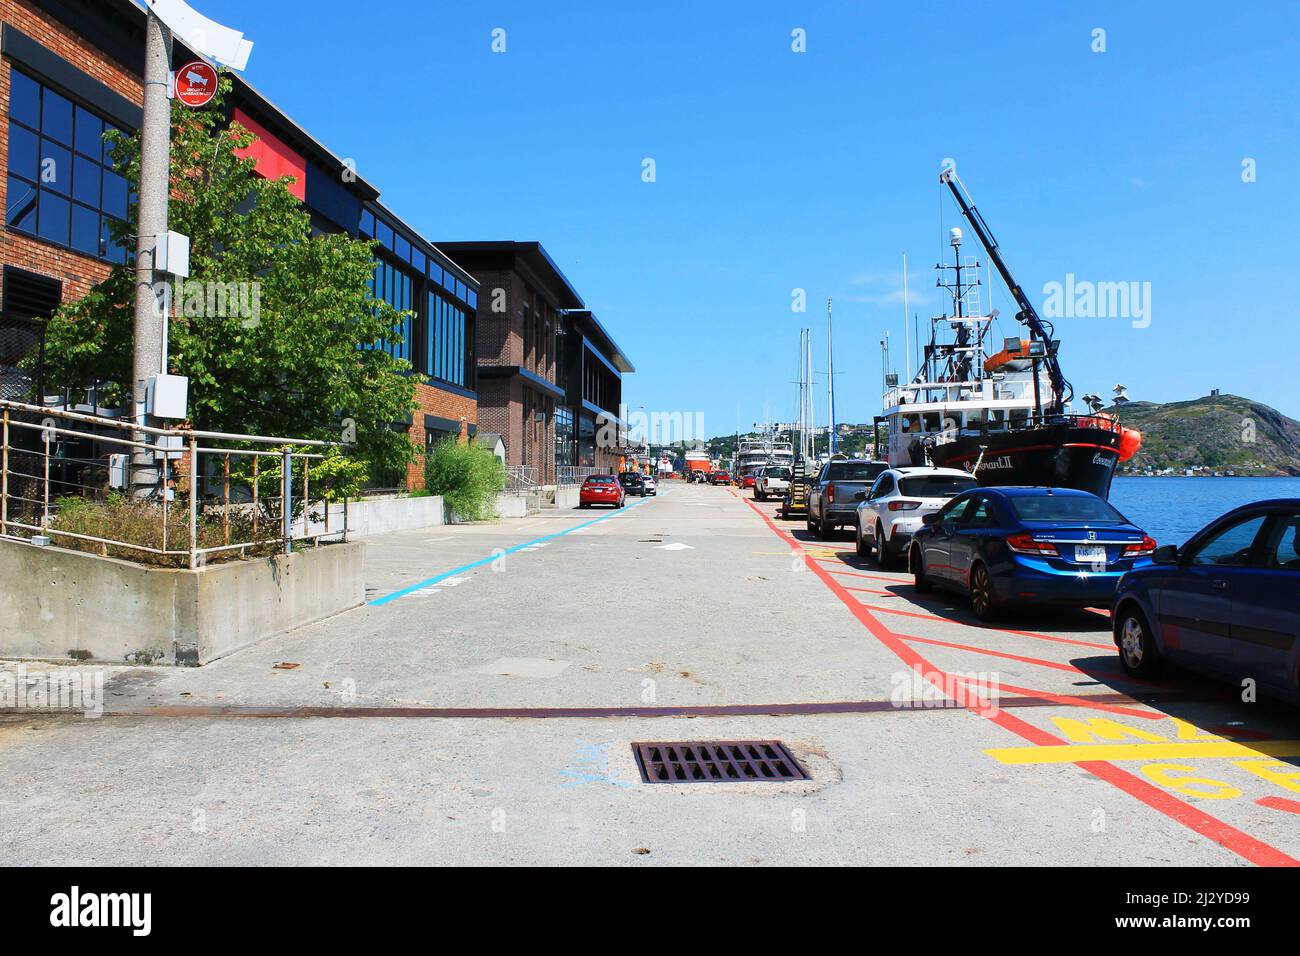 A view looking along the St. john's waterfront, with the harbour on one side and the restaurants and bars on the other. Stock Photo